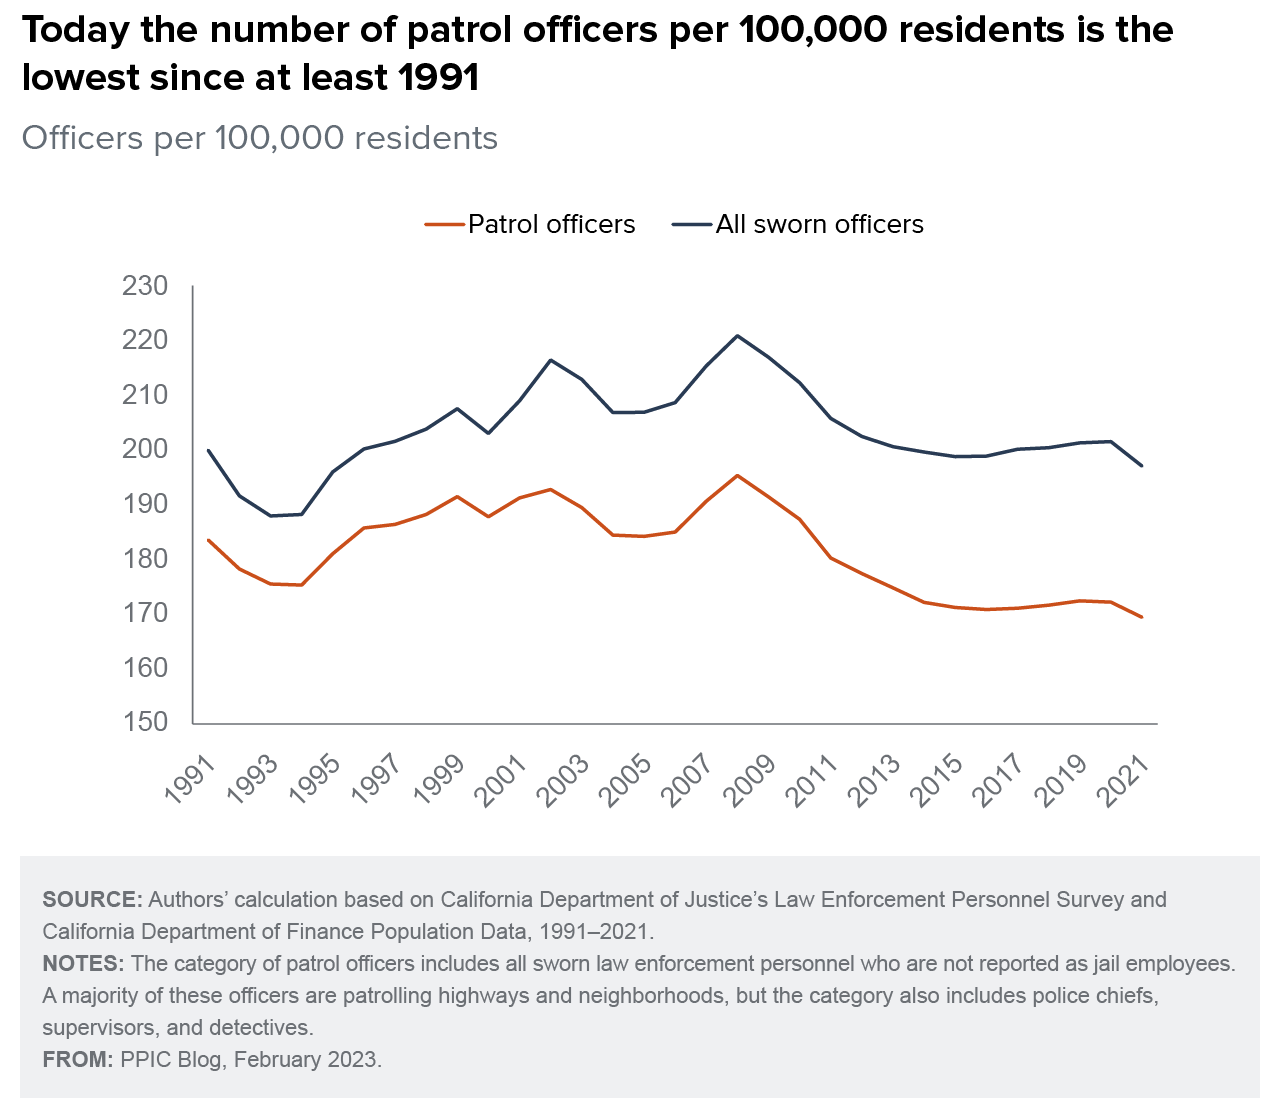 figure - Today the number of patrol officers per 100,000 residents is the lowest since at least 1991